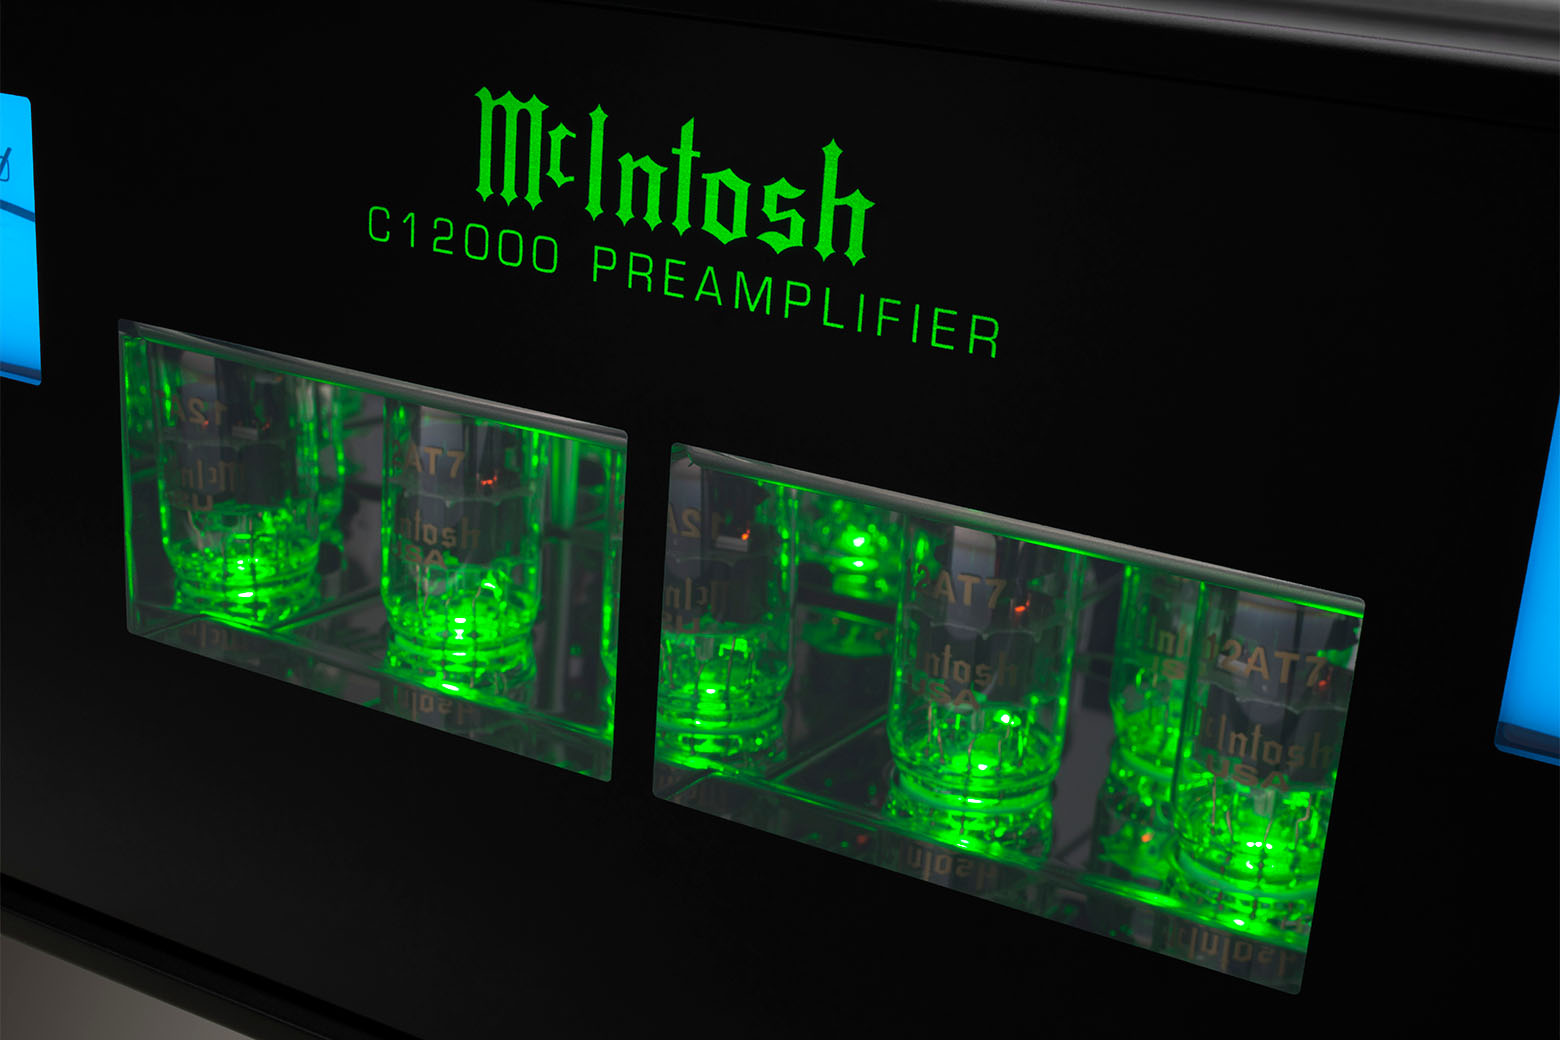 McIntosh C12000 2-Channel Solid State and Vacuum Tube Pre Ampliler